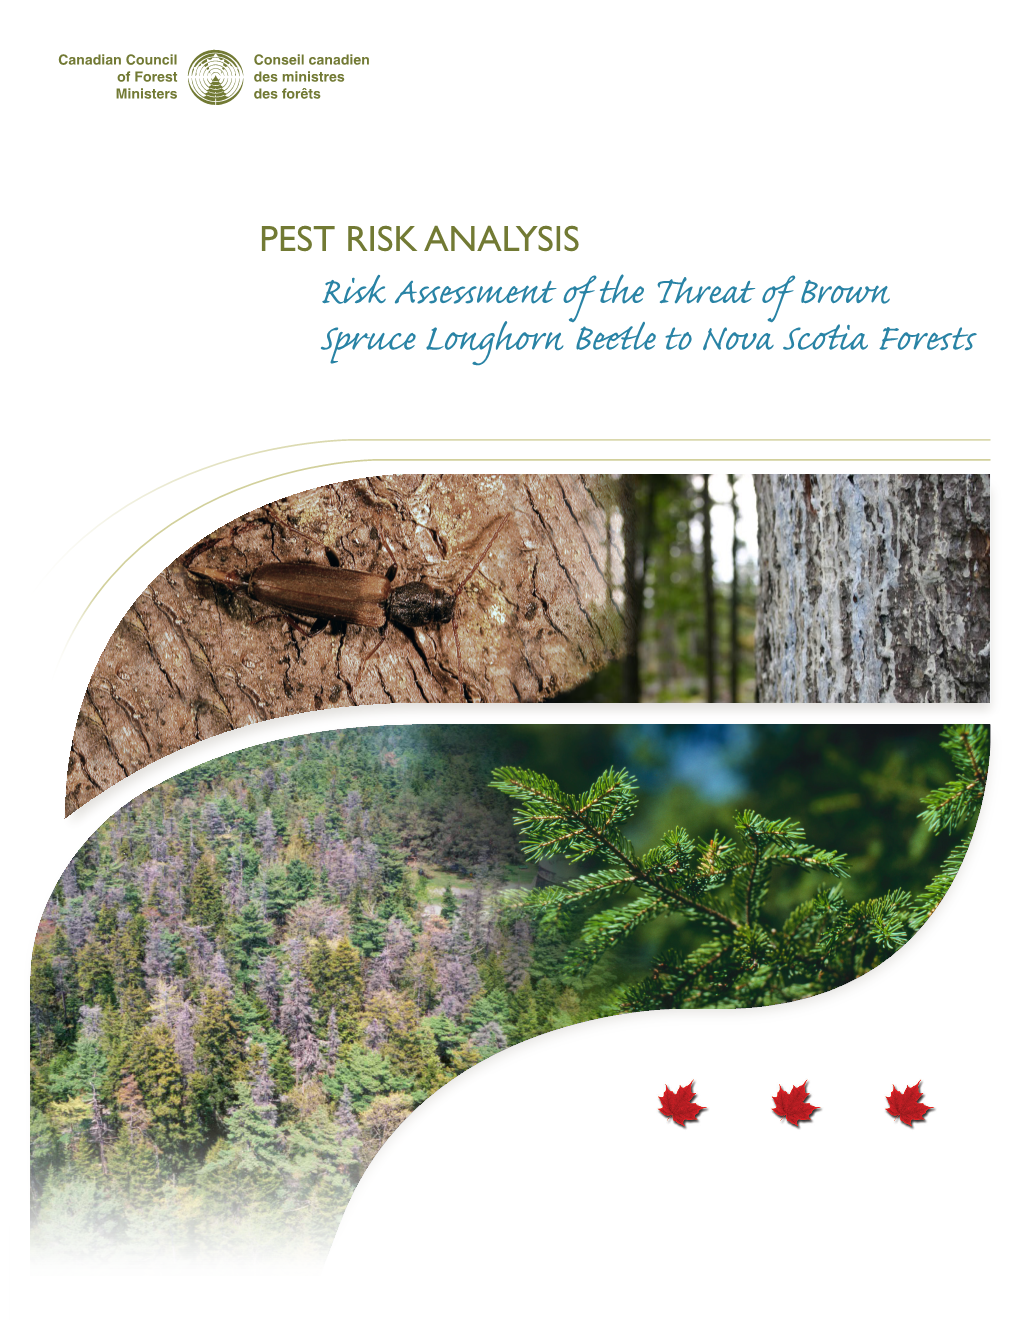 Pest Risk Analysis: Risk Assessment of the Threat of Brown Spruce Longhorn Beetle to Nova Scotia Forests